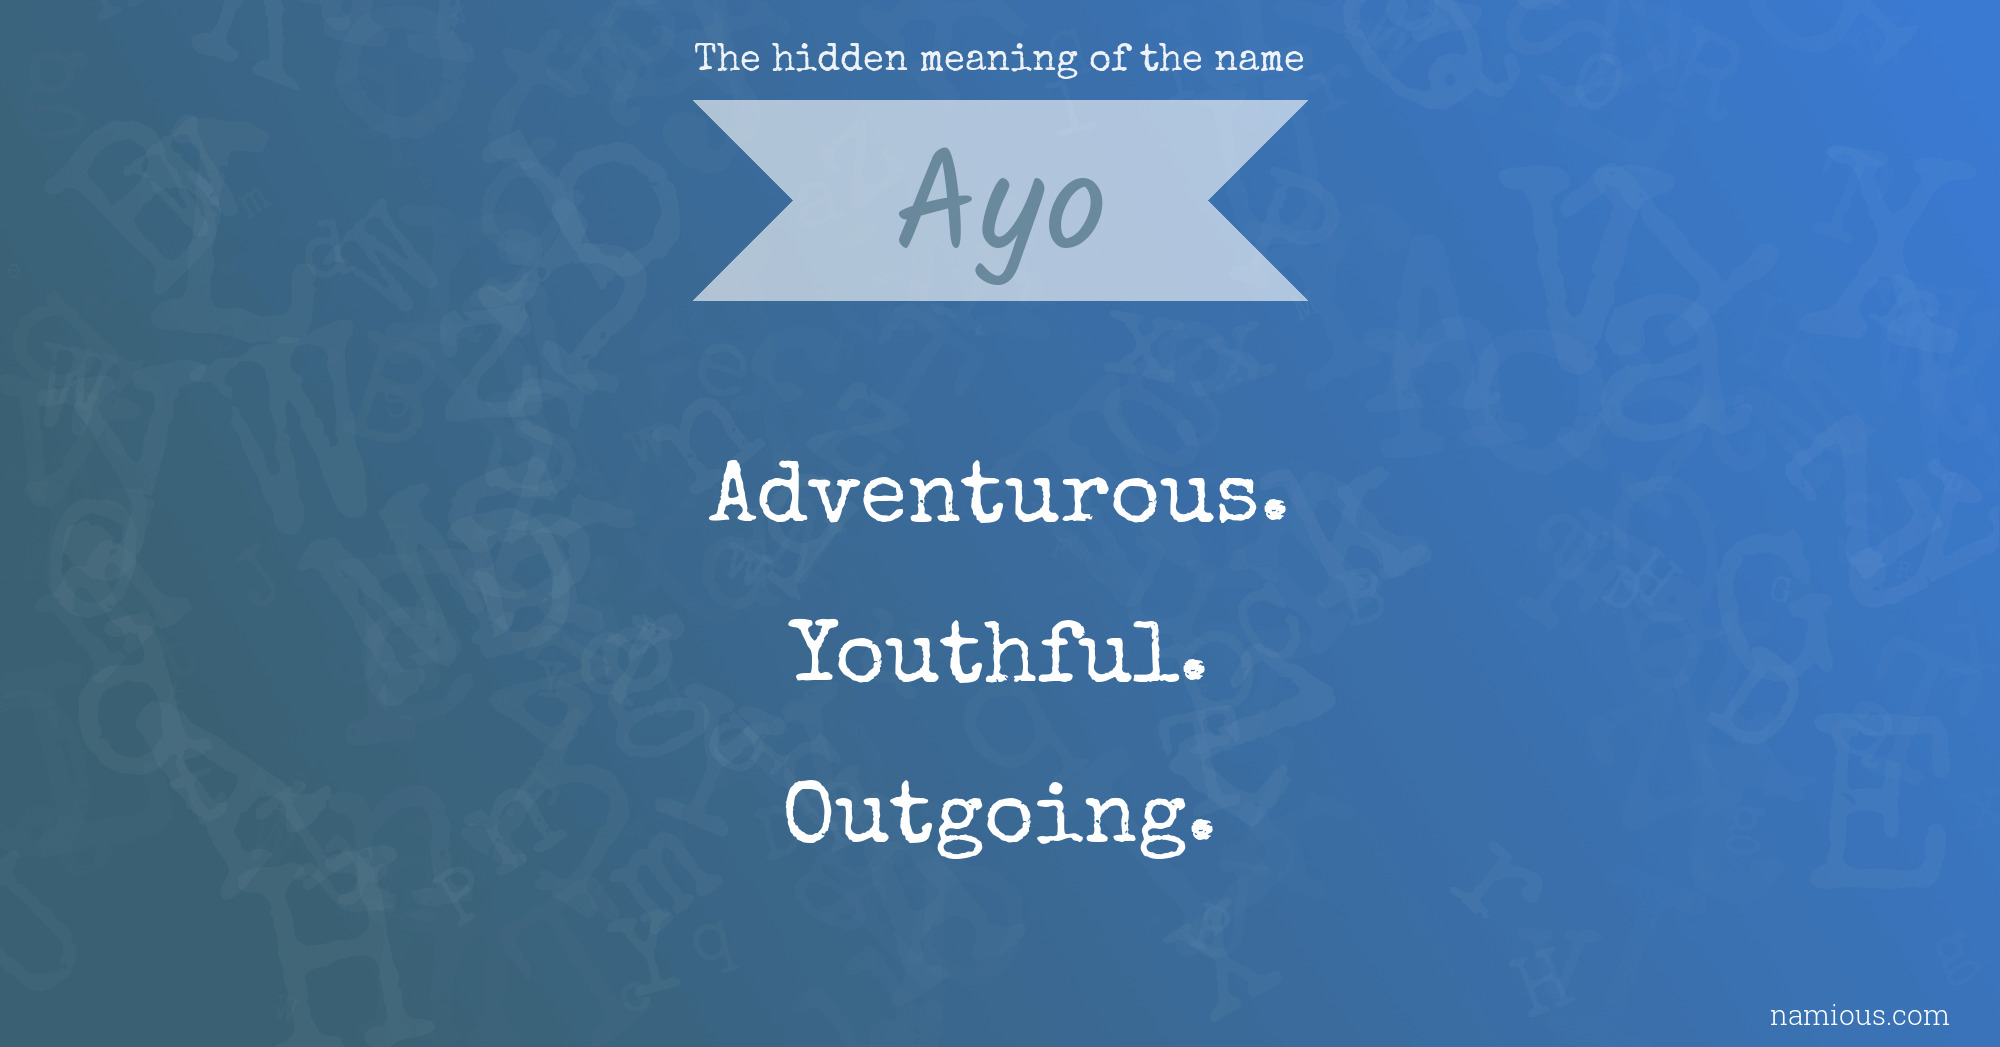 The hidden meaning of the name Ayo